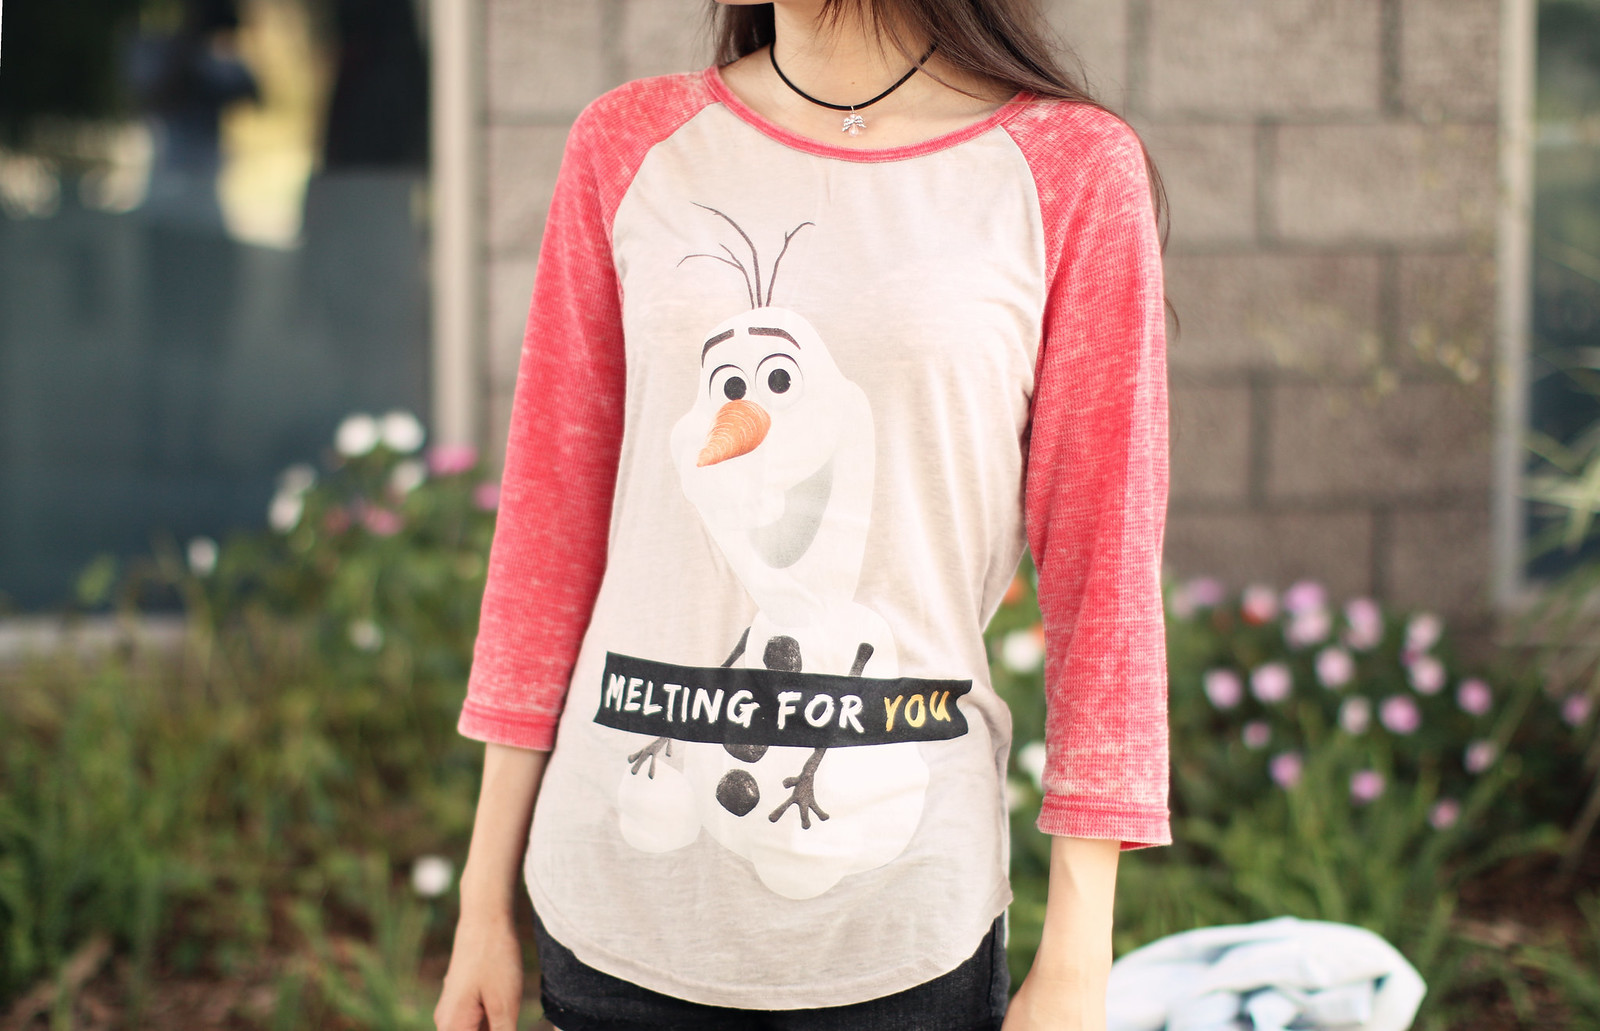 0221-olaf-graphic-tee-sporty-chic-athleisure-summer-style-asian-fashion